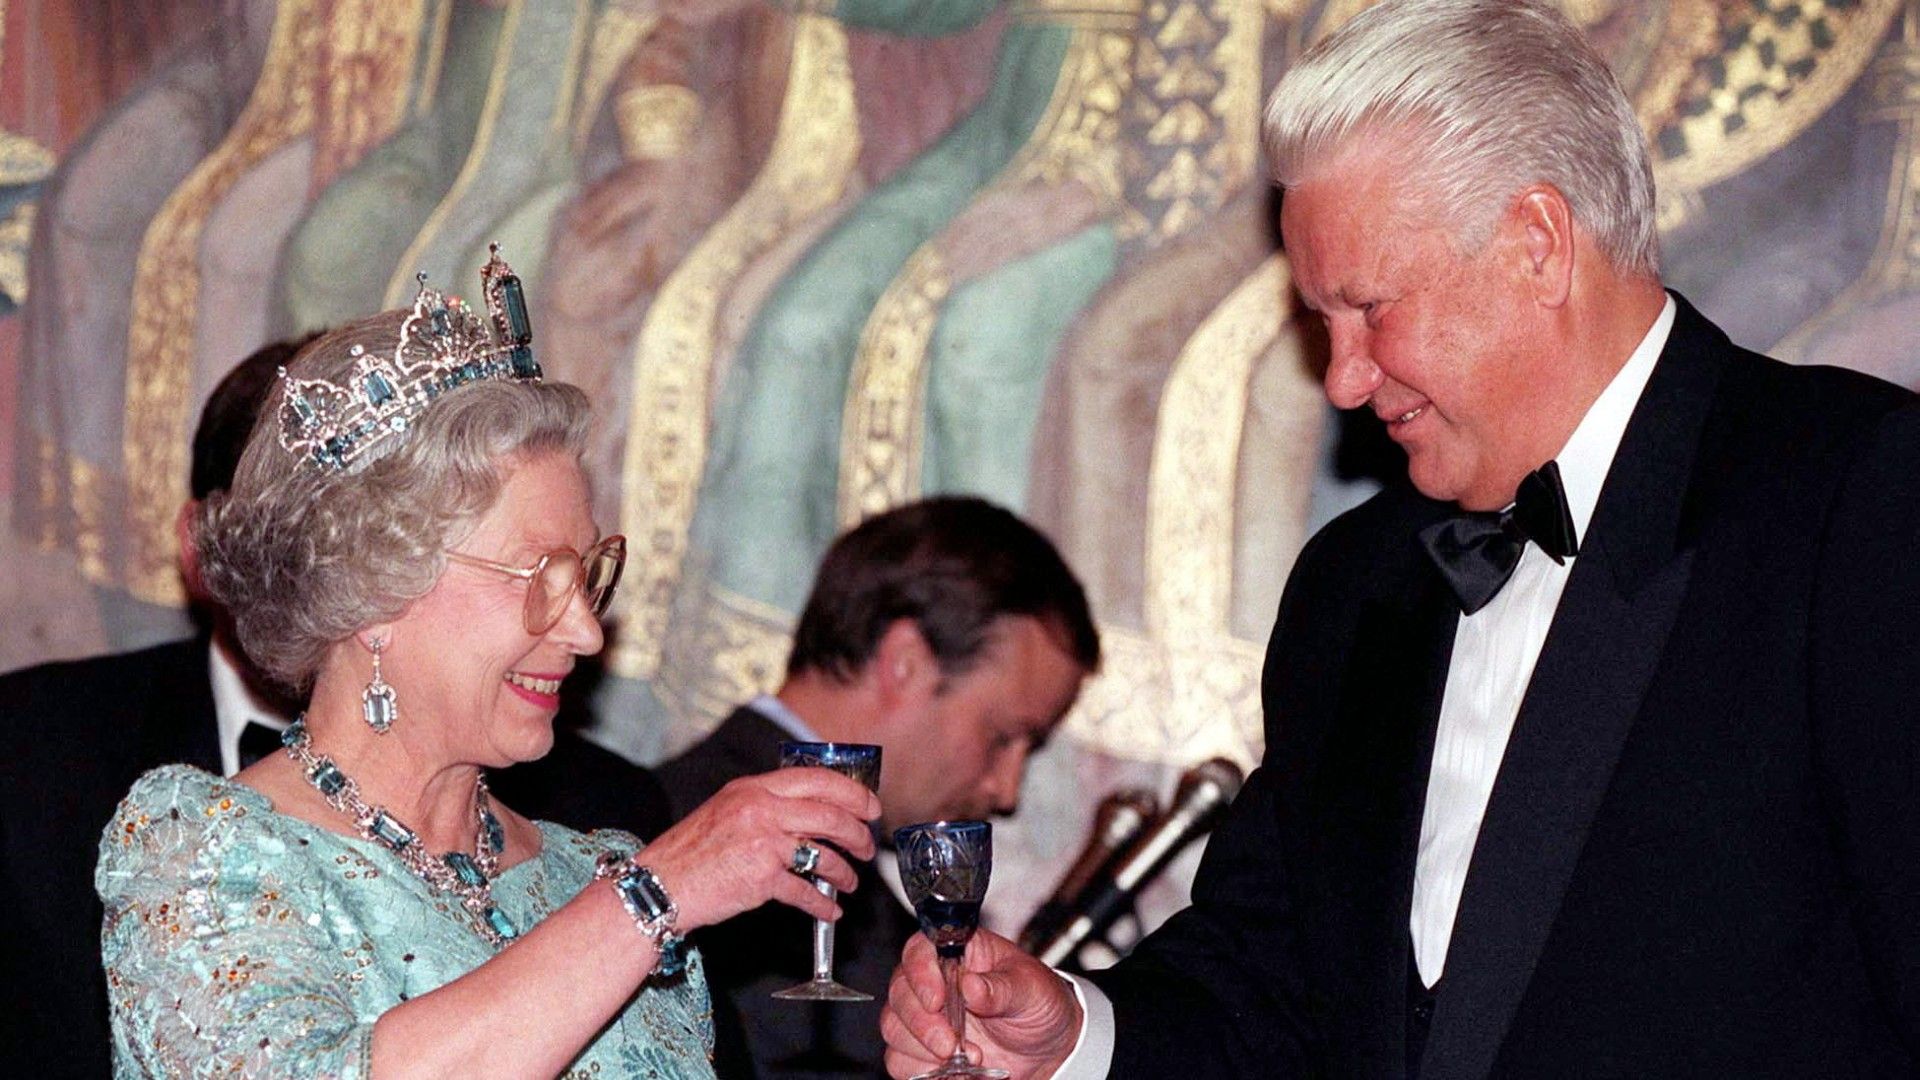 <p>                     In 1994, Queen Elizabeth II made a historic visit to Russia, marking the very first time that a UK monarch had ever visited the country. Making the trip following the dissolution of the Soviet Union, the Queen was hosted by Russia’s President at the time, Boris Yeltsin, who governed the country from 1991 to 1999.                   </p>                                      <p>                     During a State dinner, both Elizabeth and the President acknowledged Russia’s troubled past, with Yeltsin explaining in his speech, "For Russia, this visit is the utmost recognition that our country is on the road to democracy."                   </p>                                      <p>                     The Queen concurred, making this statement in her own speech: "You and I have spent most of our lives believing that this evening could never happen. I hope that you are as delighted as I am to be proved wrong."                   </p>                                      <p>                     Queen Elizabeth remains the only UK monarch to have visited Russia during their reign. Charles did visit the country as the Prince of Wales, taking a trip to St. Petersburg in 1994, but has not returned since becoming King.                   </p>